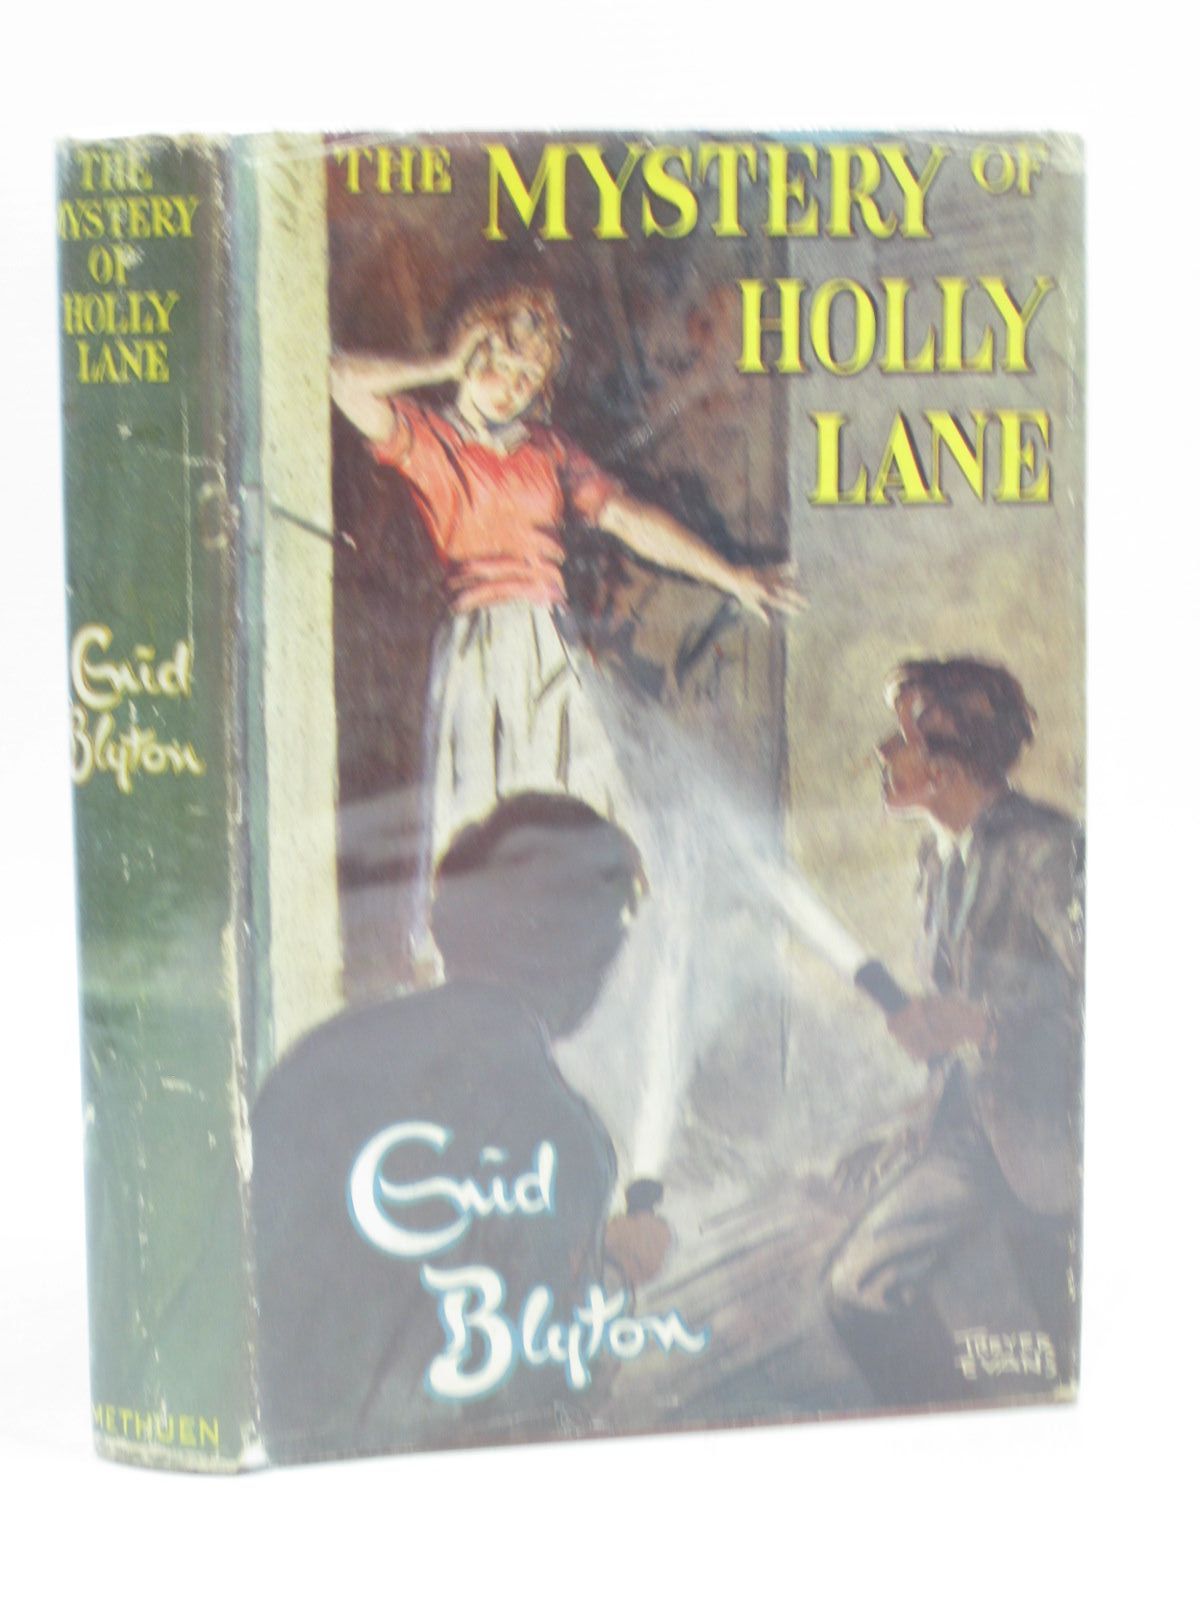 Cover of THE MYSTERY OF HOLLY LANE by Enid Blyton